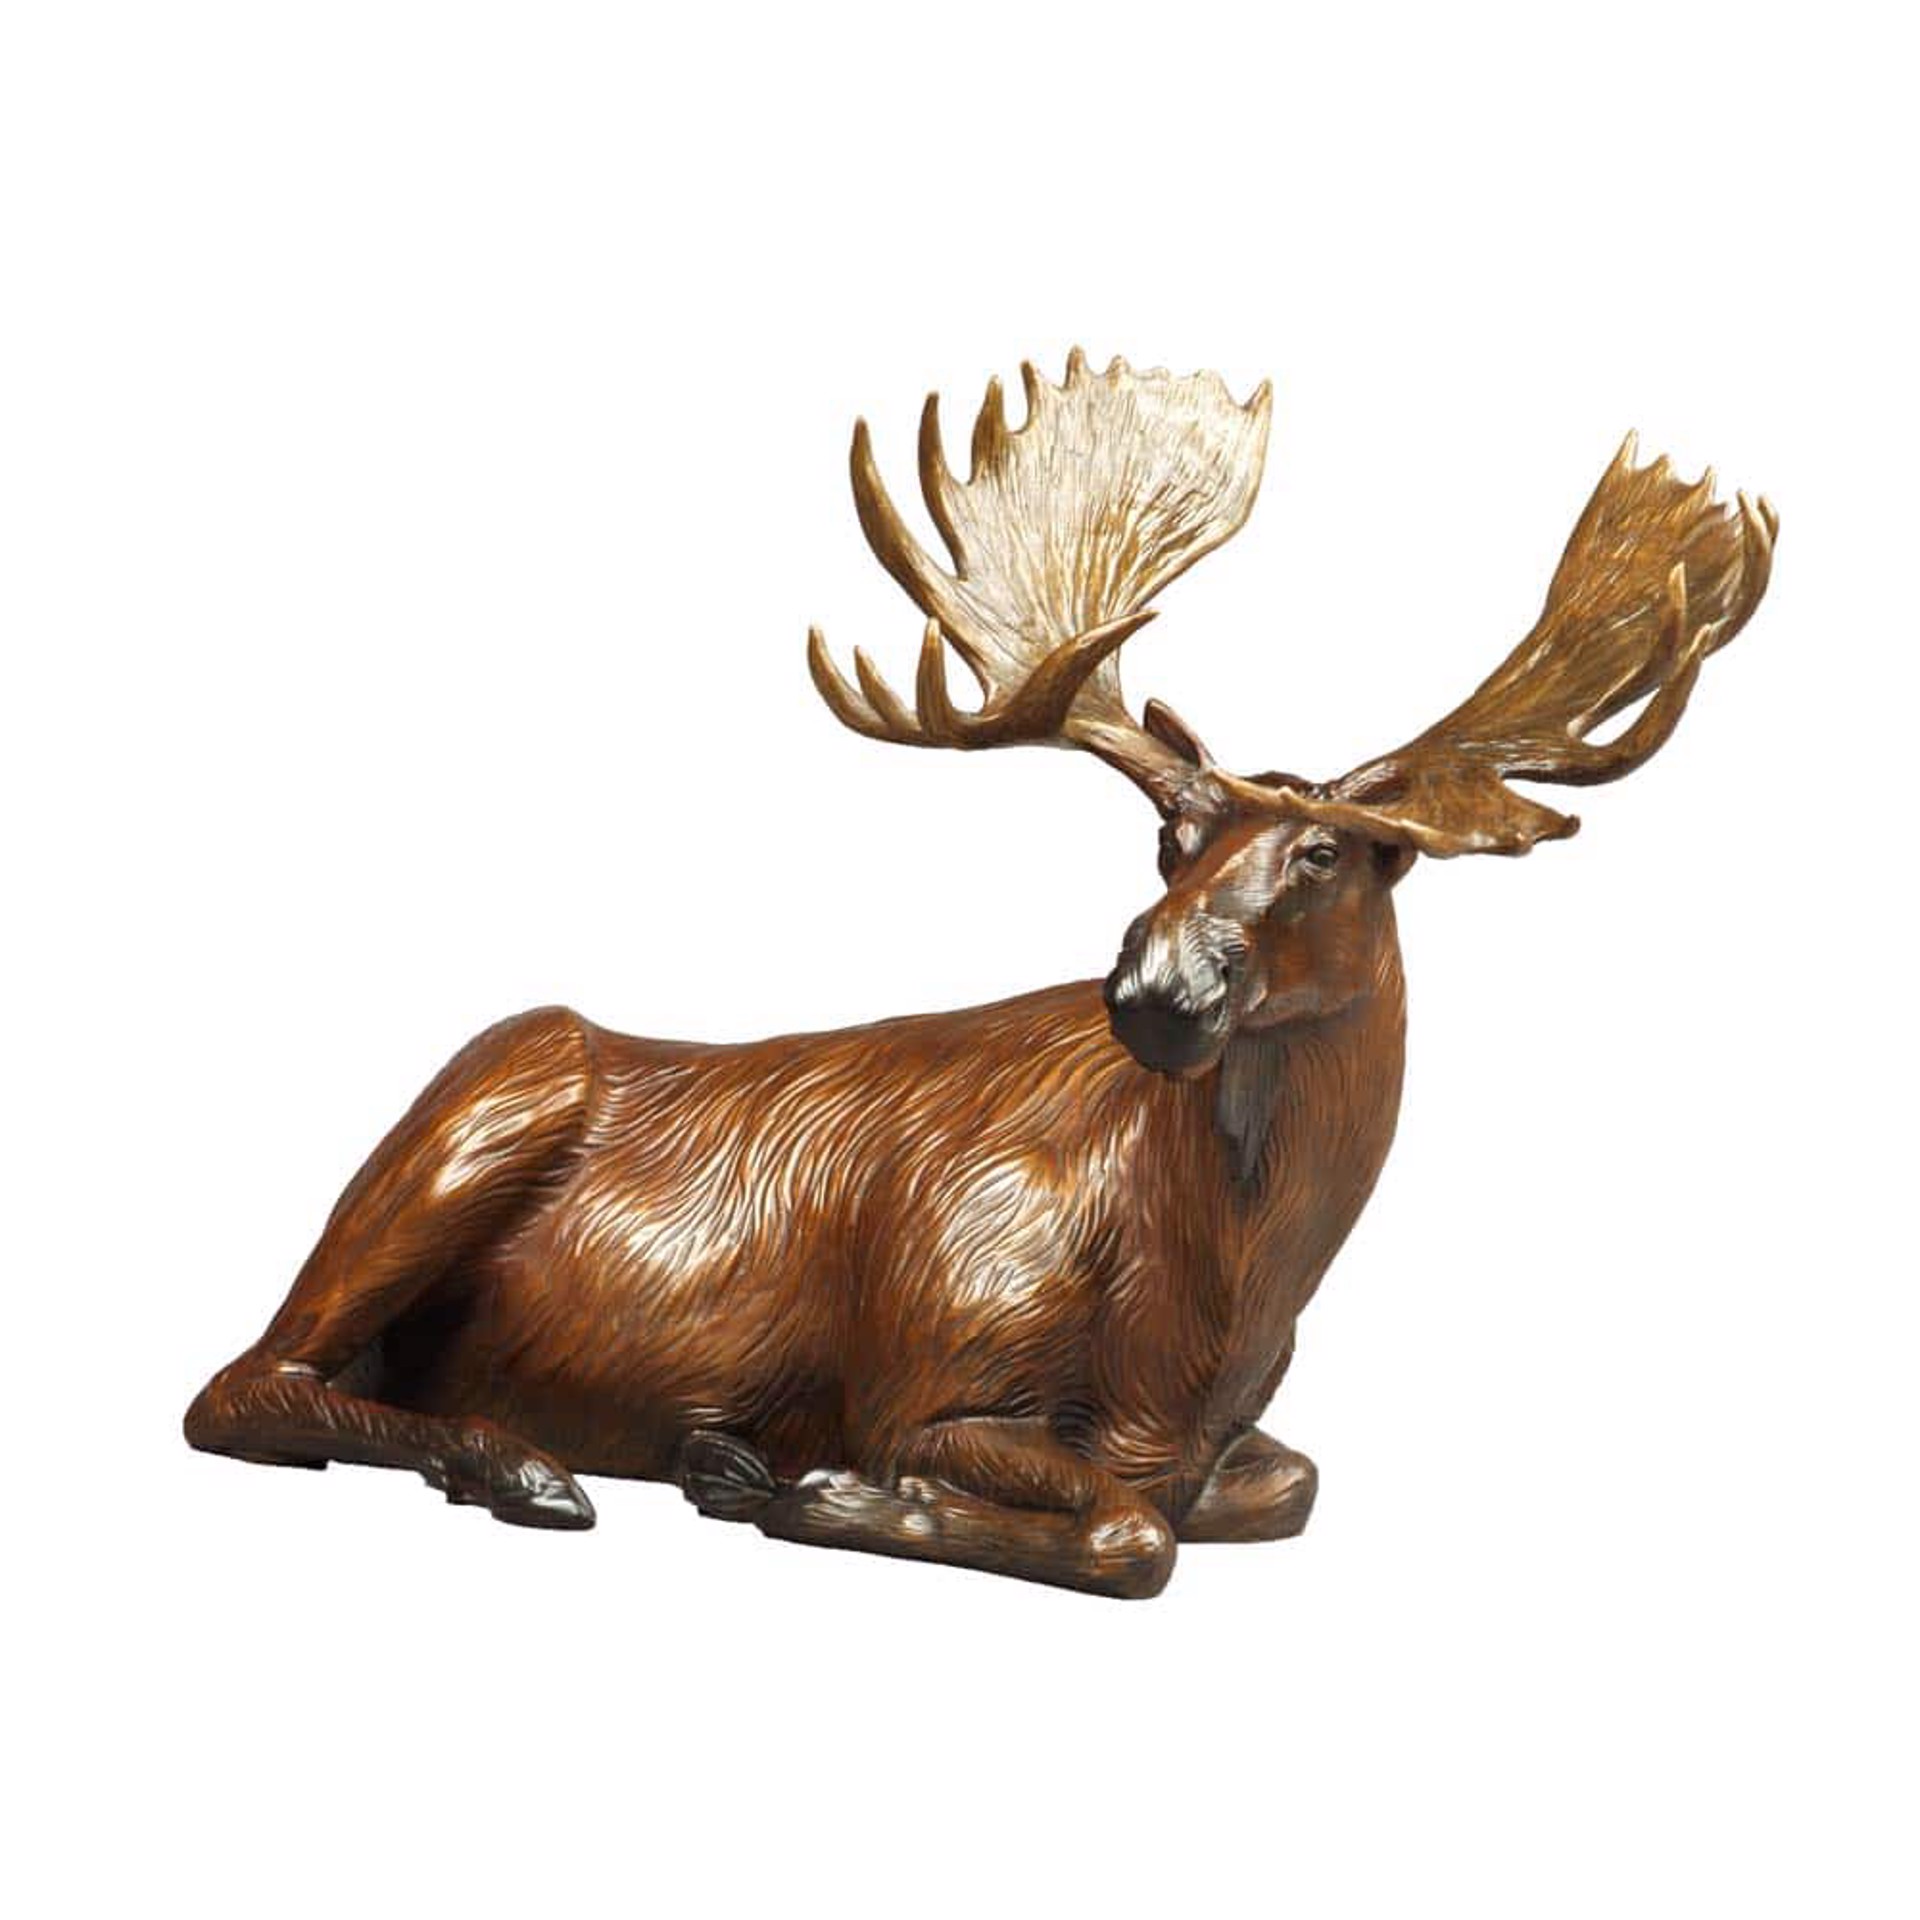 Bull Moose Laying Down Original Bronze Sculpture by Rip and Alison Caswell, Contemporary Fine Art, Modern Wildlife Art, Available At Gallery Wild